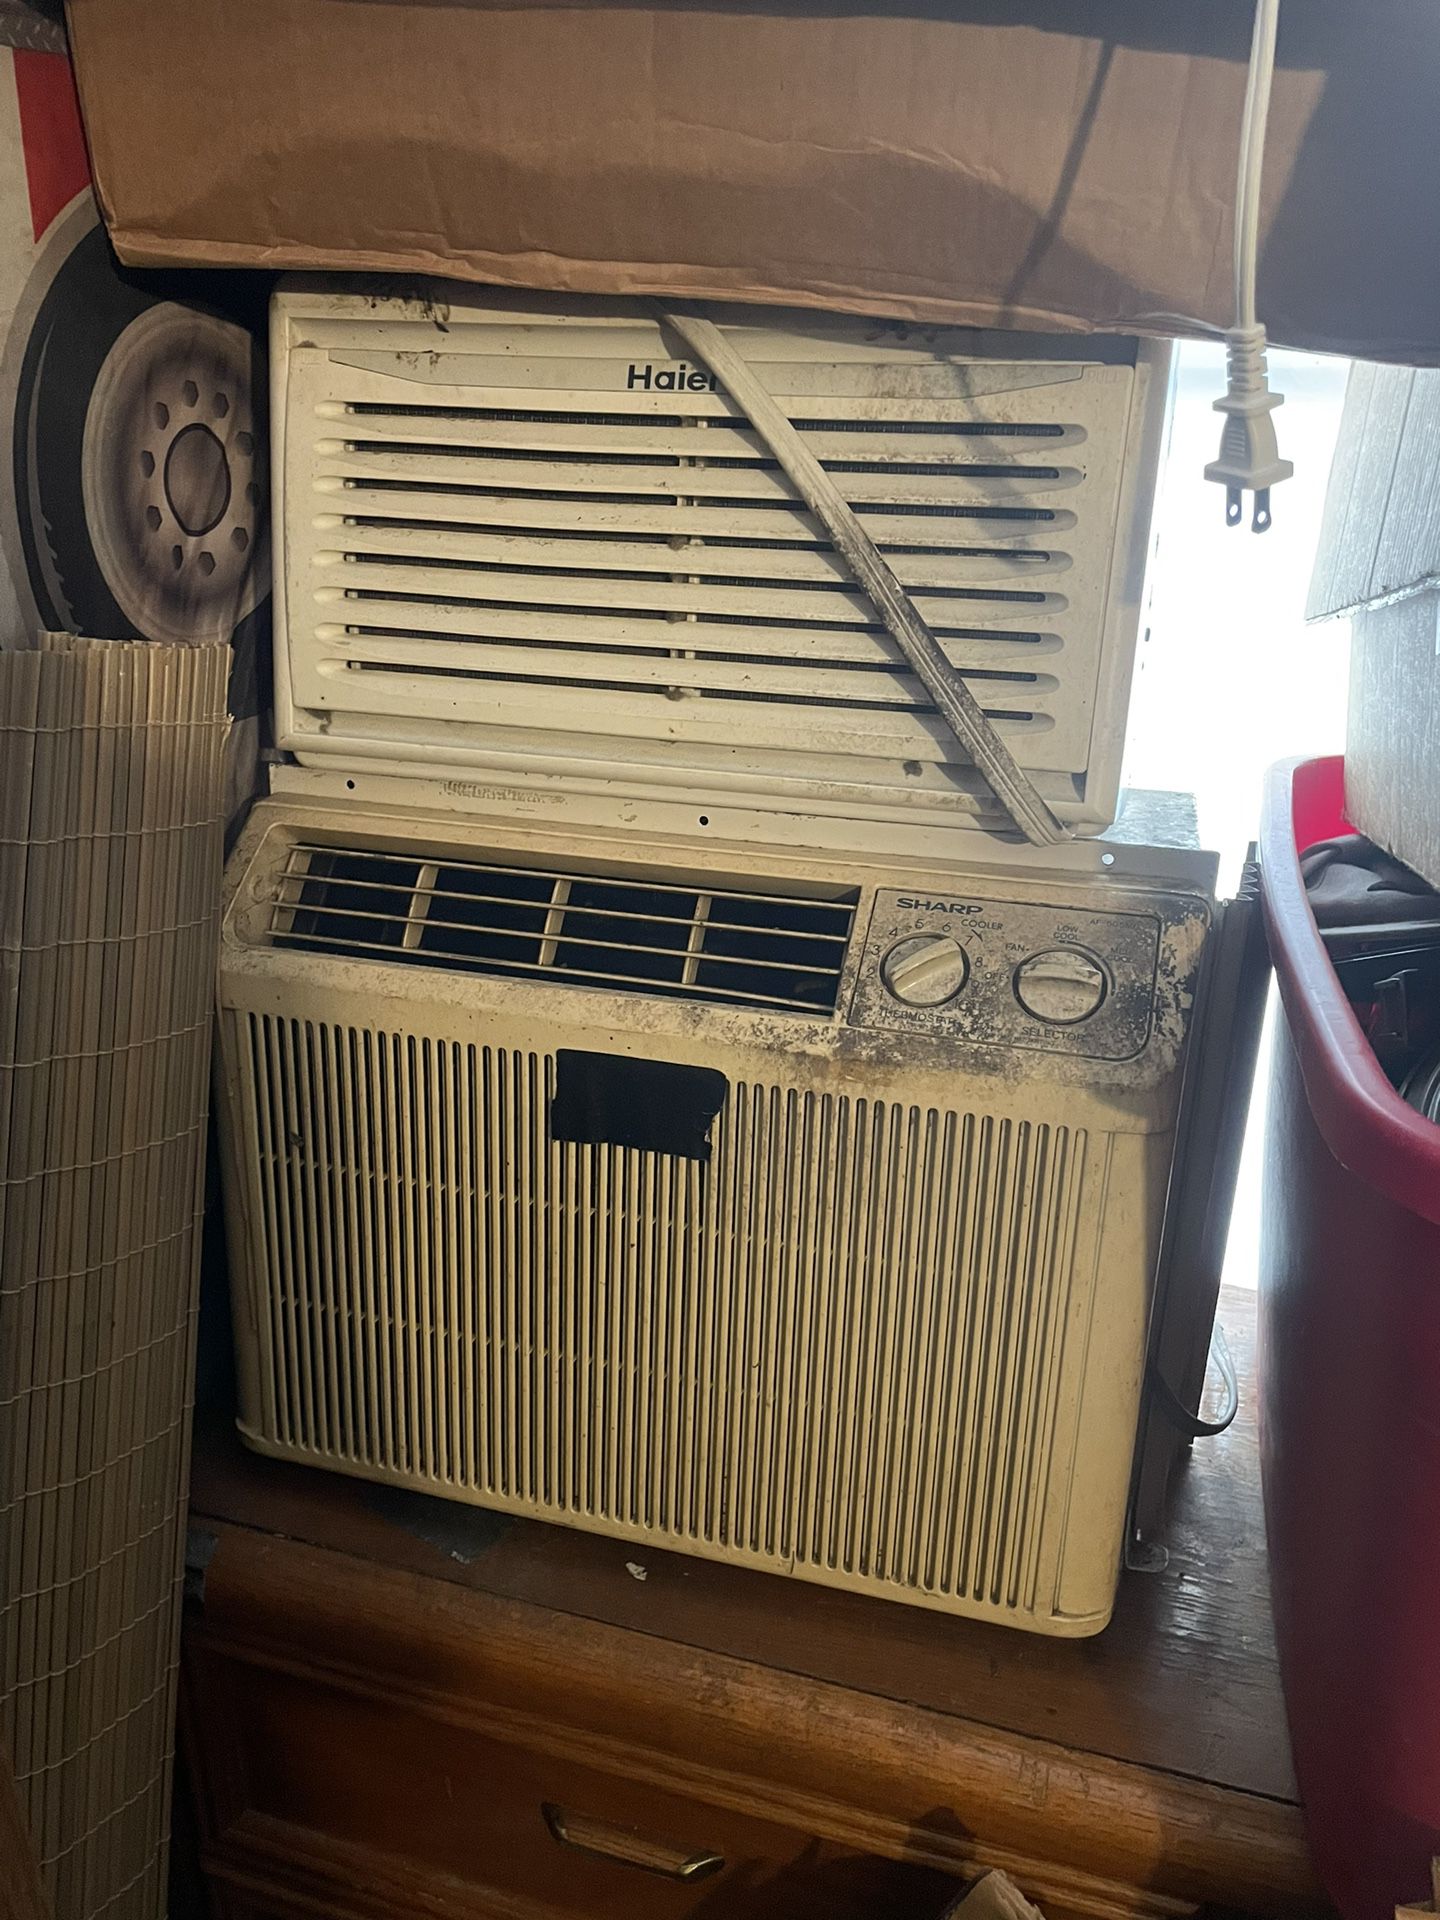 2 Air Conditioners Must Be Clean But Work . 